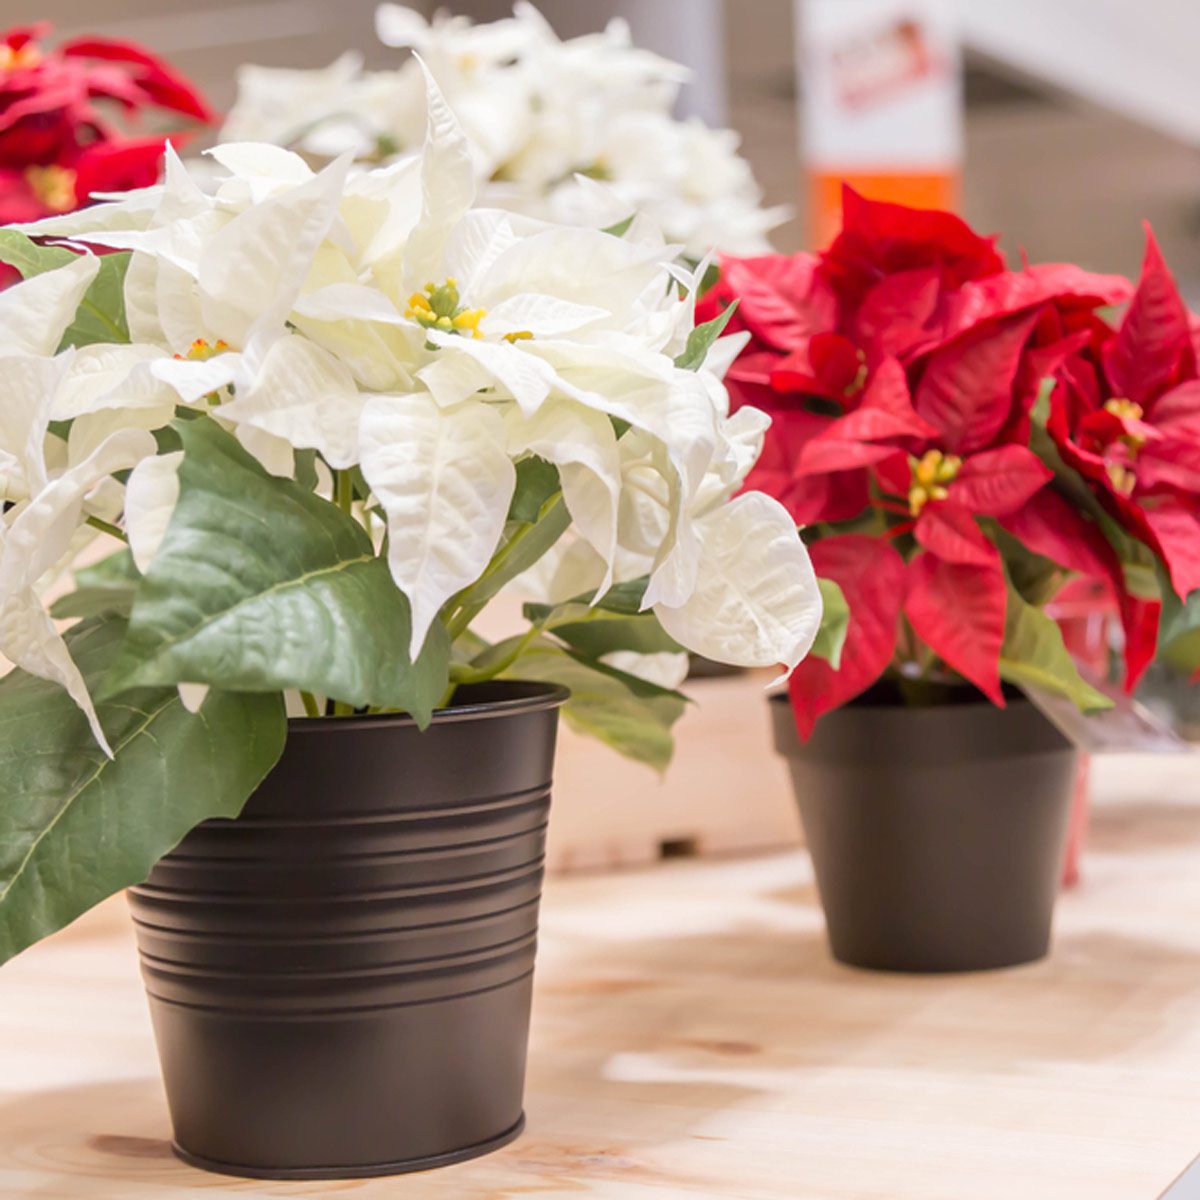 5 Things You Didn't Know About Poinsettias